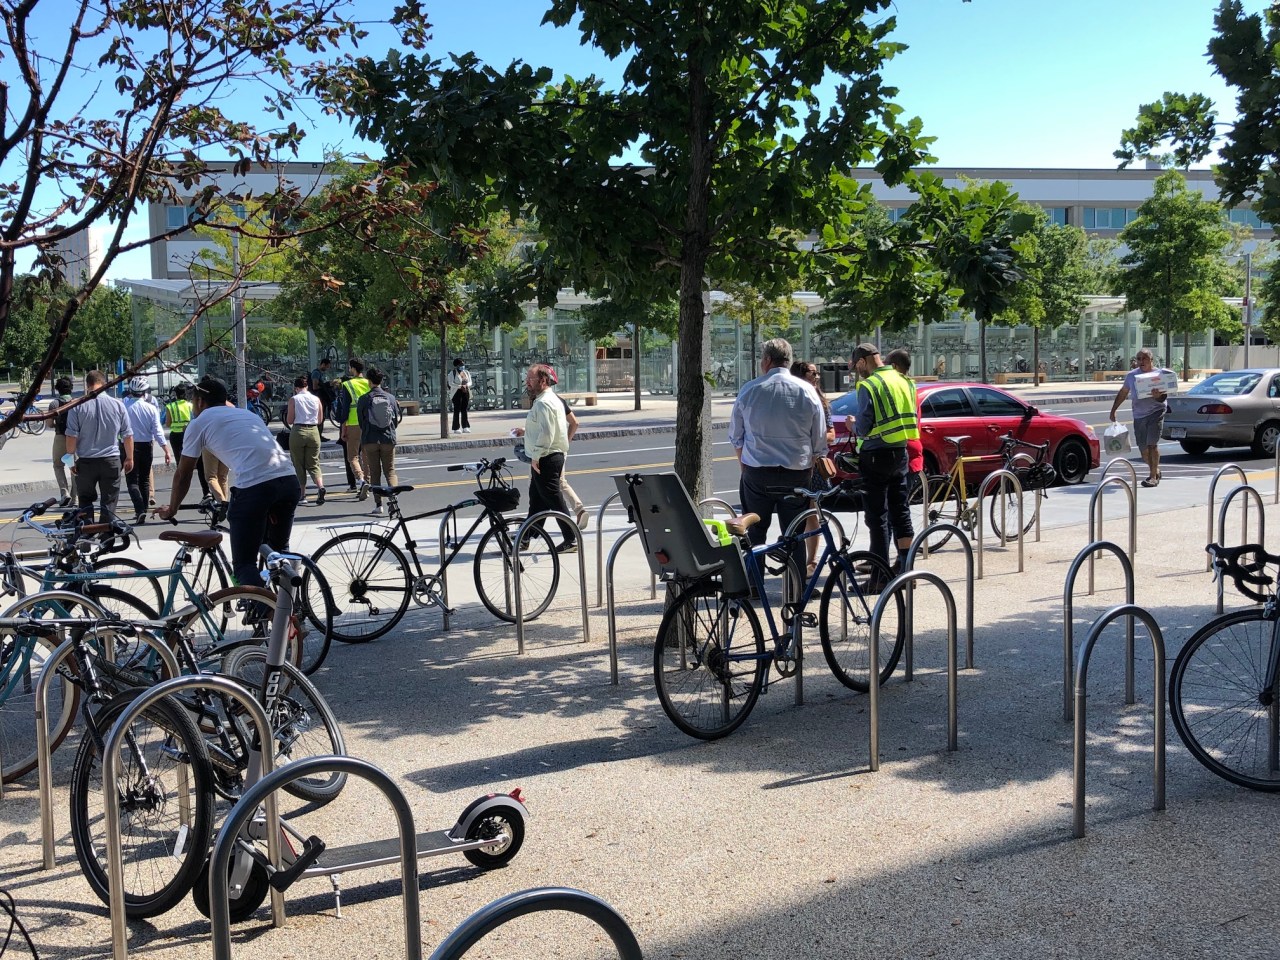 An array of U-shaped ground-mounted bike racks occupies a courtyard next to a small street. In the distance, on the other side of the street, is a long glass-clad bike parking shed full of bikes..